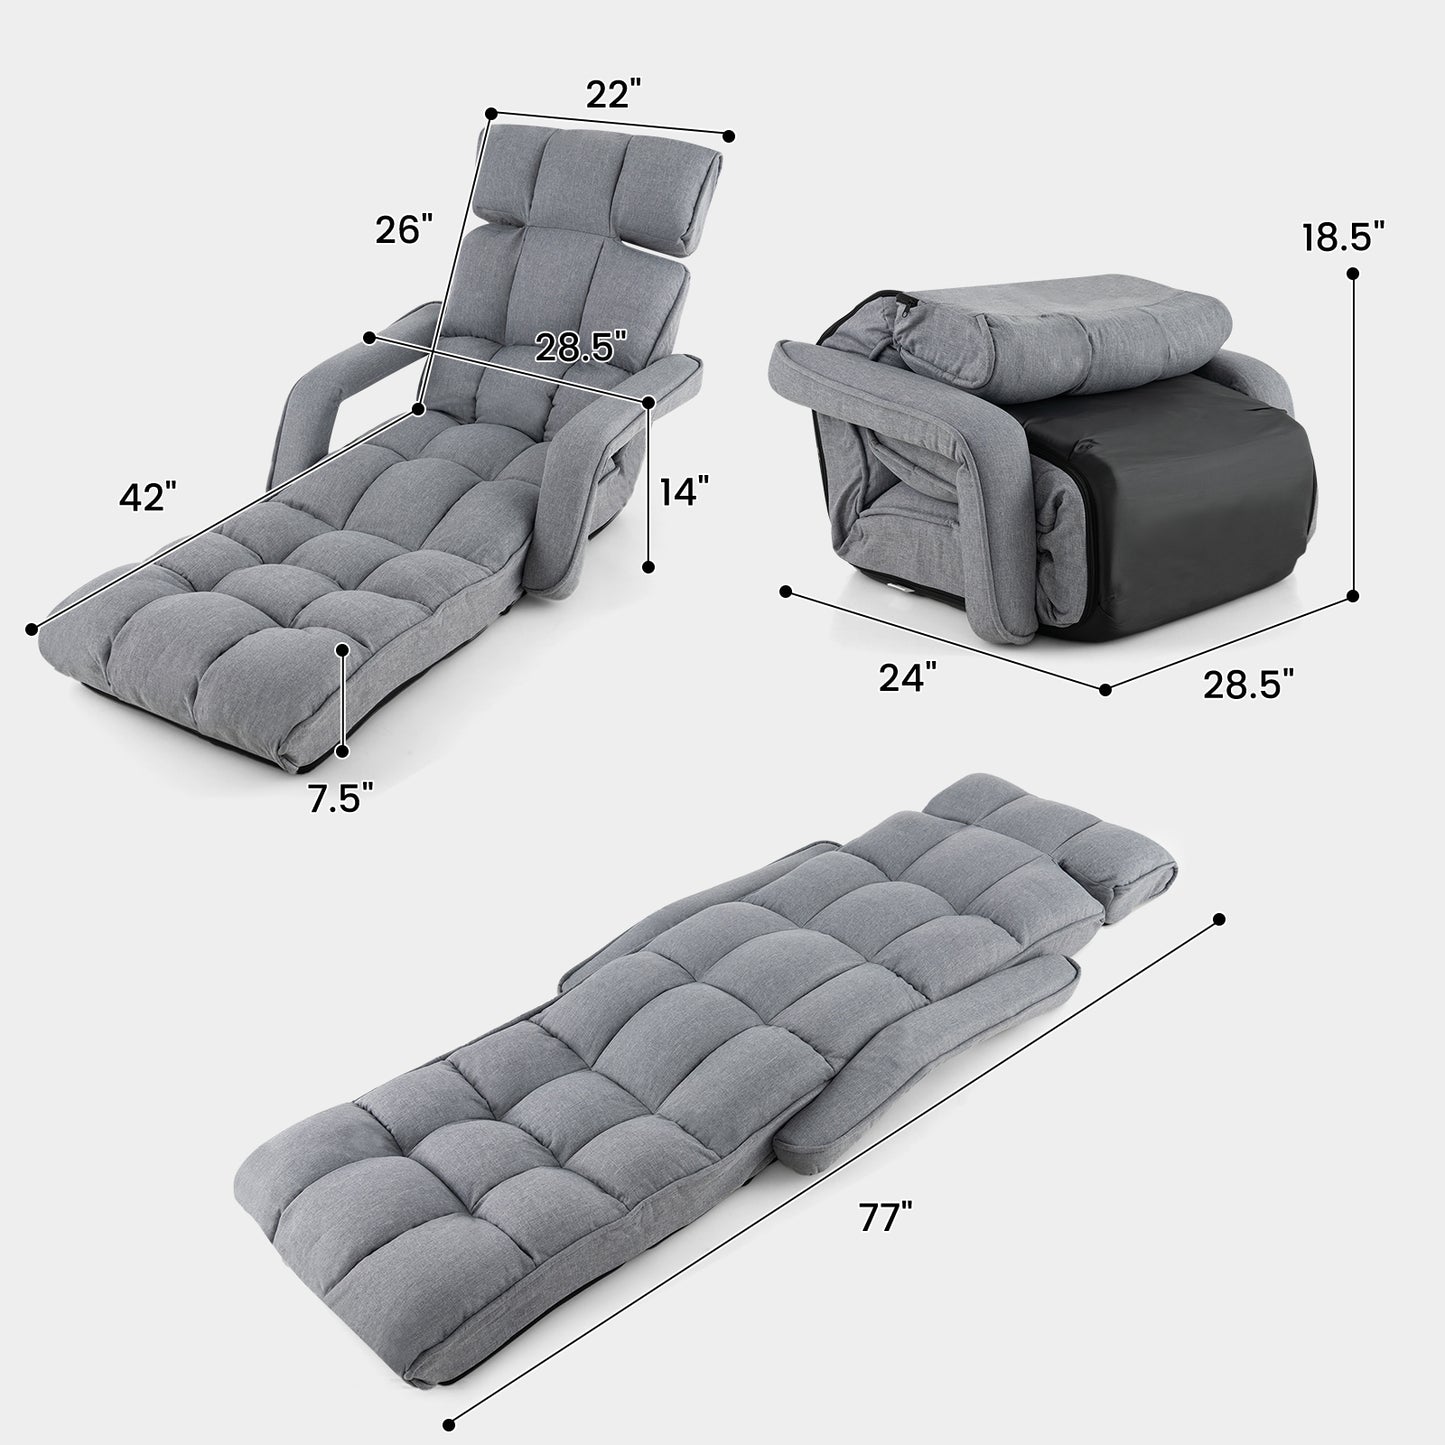 6-Position Adjustable Floor Chair with Adjustable Armrests and Footrest-Gray